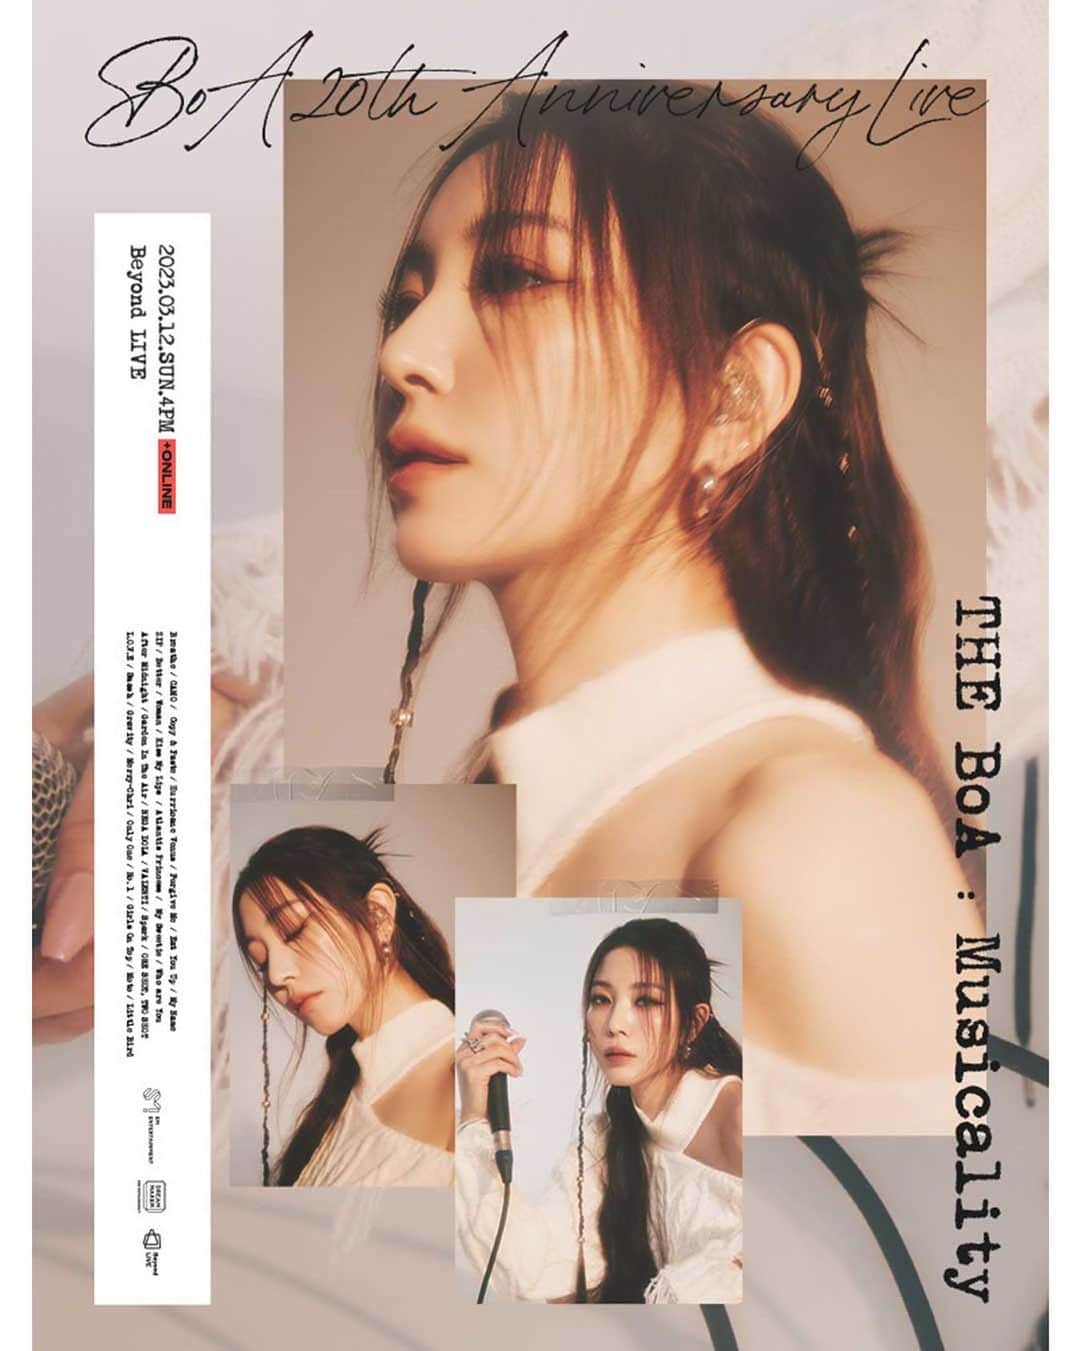 BoAさんのインスタグラム写真 - (BoAInstagram)「Beyond LIVE - BoA 20th Anniversary Live - THE BoA : Musicality    📆 3/12 SUN 4PM (KST)  👉 Price   KOREA : LIVE ONLY ￦55,000 / LIVE + Re-Streaming ￦62,000  JAPAN : LIVE ONLY 5,500円 / LIVE + Re-Streaming 6,200円  GLOBAL : LIVE ONLY 50 USD / LIVE + Re-Streaming 55 USD  ※You can purchase one ticket per ID    ✅ Beyond LIVE  🔗 http://bit.ly/3lQATmO     🎫 Ticket Sales Period  - 2023년 2월 23일(목) 15:00 (KST) ~ 2023년 3월 12일(일) 17:00 (KST)  - From February 23, 2023 (THU) 15:00 to March 12, 2023 (SUN) 17:00 (KST)    ✅ SMTOWN &STORE   -PC  KO: https://bit.ly/3IjPw9X   EN: https://bit.ly/3kjMj25   JP: https://bit.ly/3kjLfeK   CN: https://bit.ly/3YTkL2z     -MO  KO: https://bit.ly/41feGz9   EN: https://bit.ly/3knaBs3   JP: https://bit.ly/3kk2MDu   CN: https://bit.ly/3EvA6hA     🎫 Ticket Sales Period  - 2023년 2월 23일(목) 15:00 (KST) ~ 2023년 3월 12일(일) 16:00 (KST)  - From February 23, 2023 (THU) 15:00 to March 12, 2023 (SUN) 16:00 (KST)    #BoA #THE_BoA #보아  #20th_Anniversary_Live   #BeyondLIVE #비욘드라이브   #Beoynd_LIVE_Musicality」2月23日 15時00分 - boasmtown